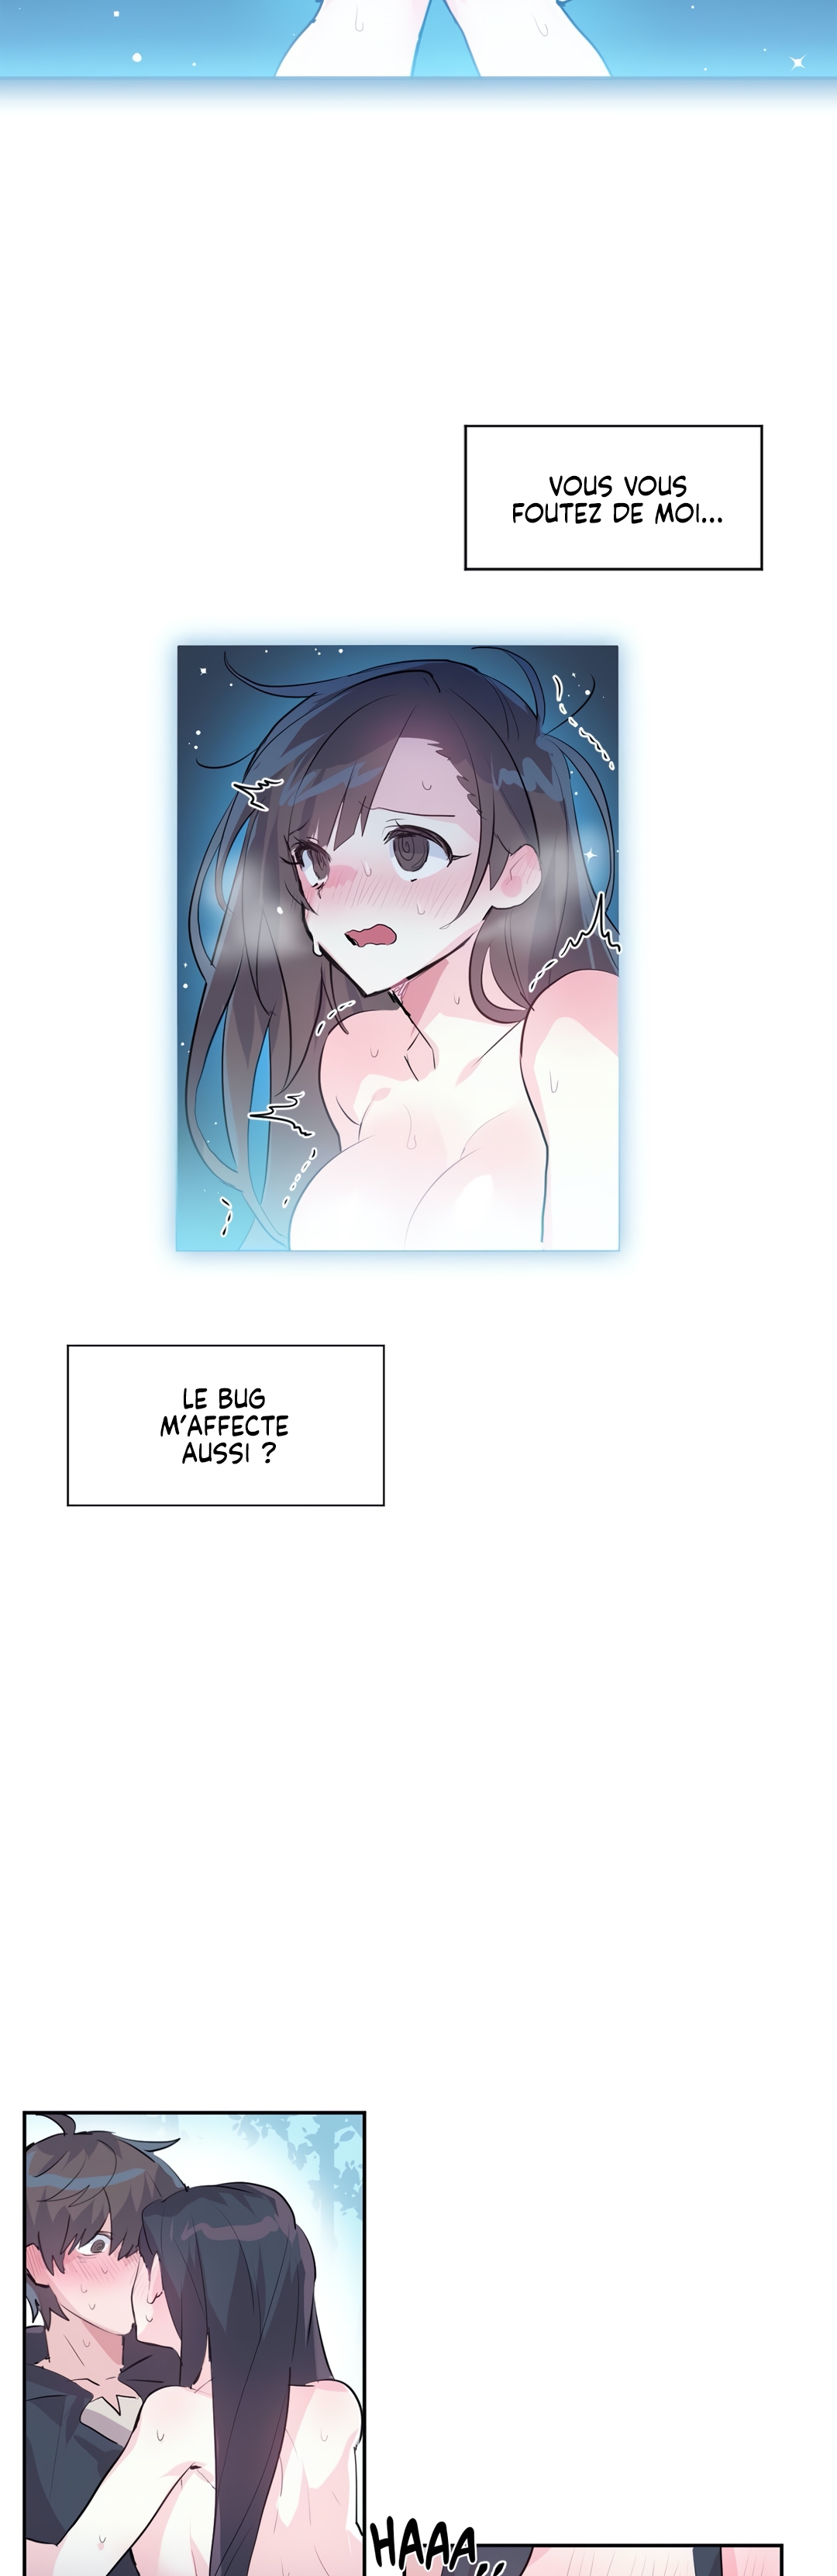 Log in to Lust-a-land VF Chapitre 1 à 5 numero d'image 36